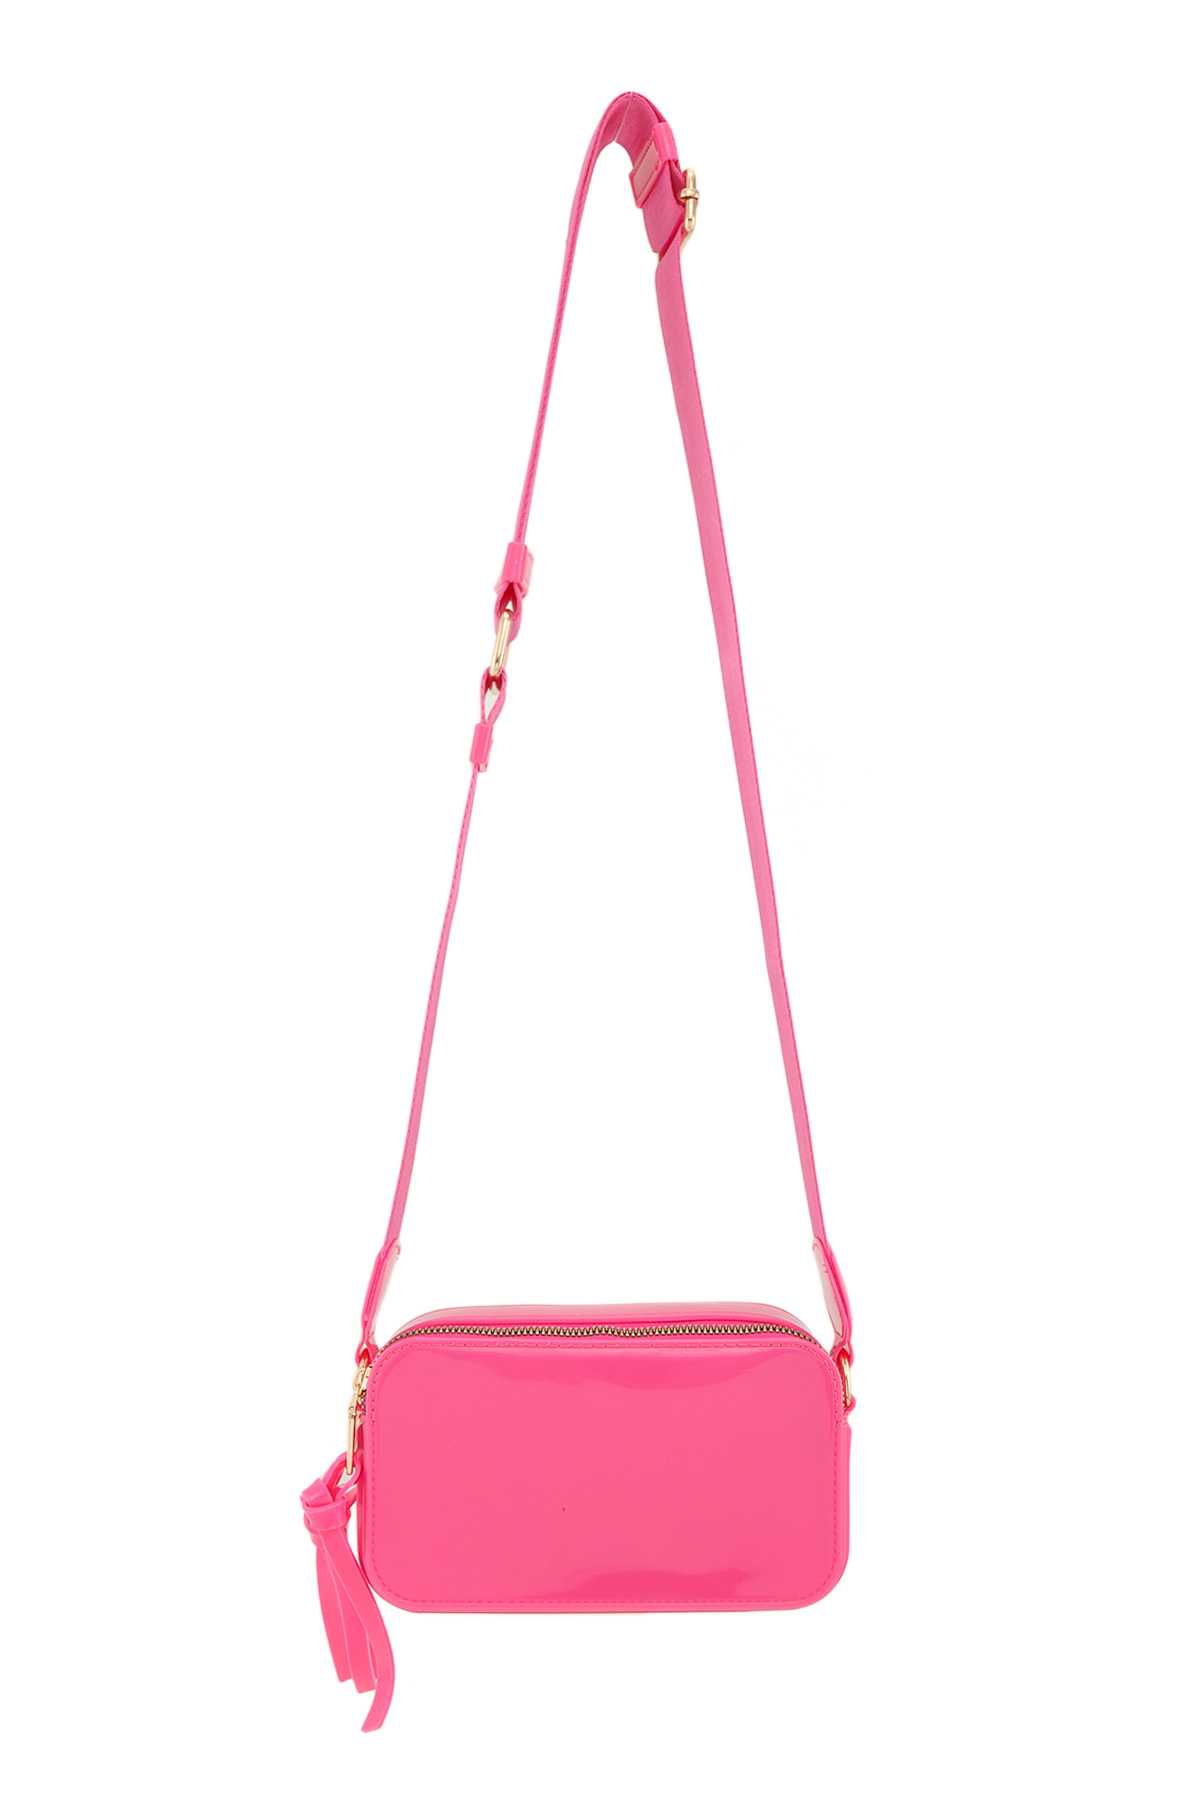 Solid Neon Rectangular Jelly Bag with Tassel